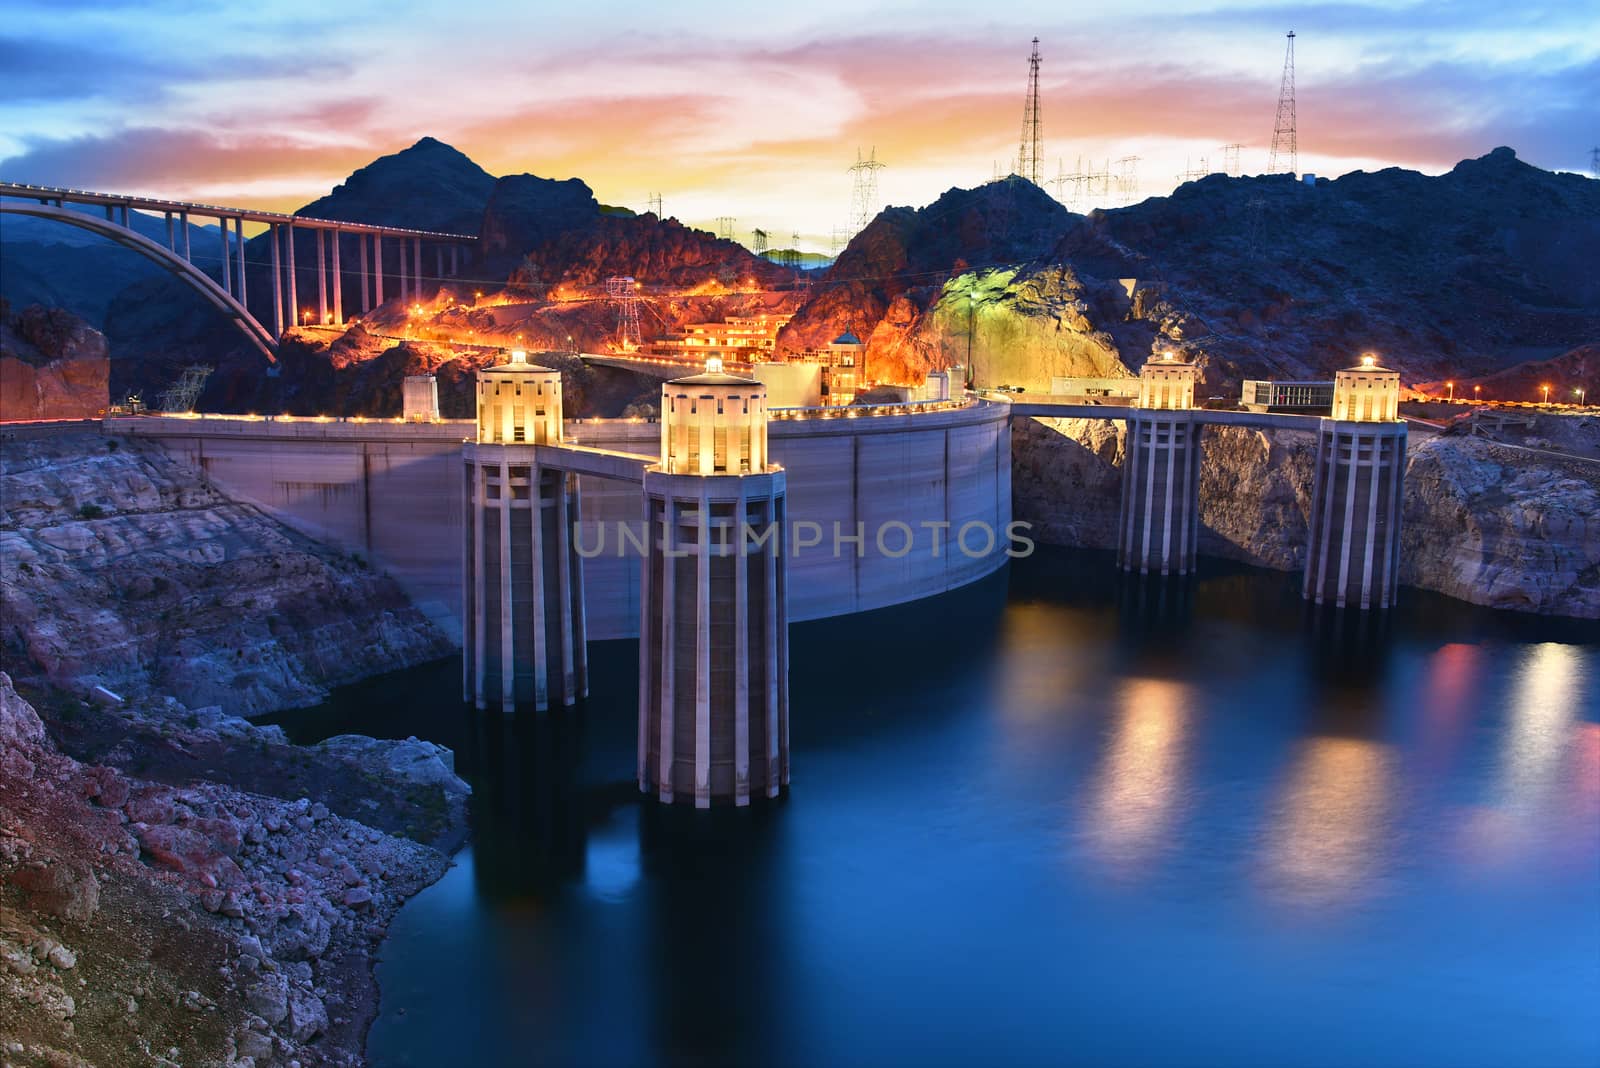 Hoover Dam near Lake Mead in Boulder, Nevada USA by igorot